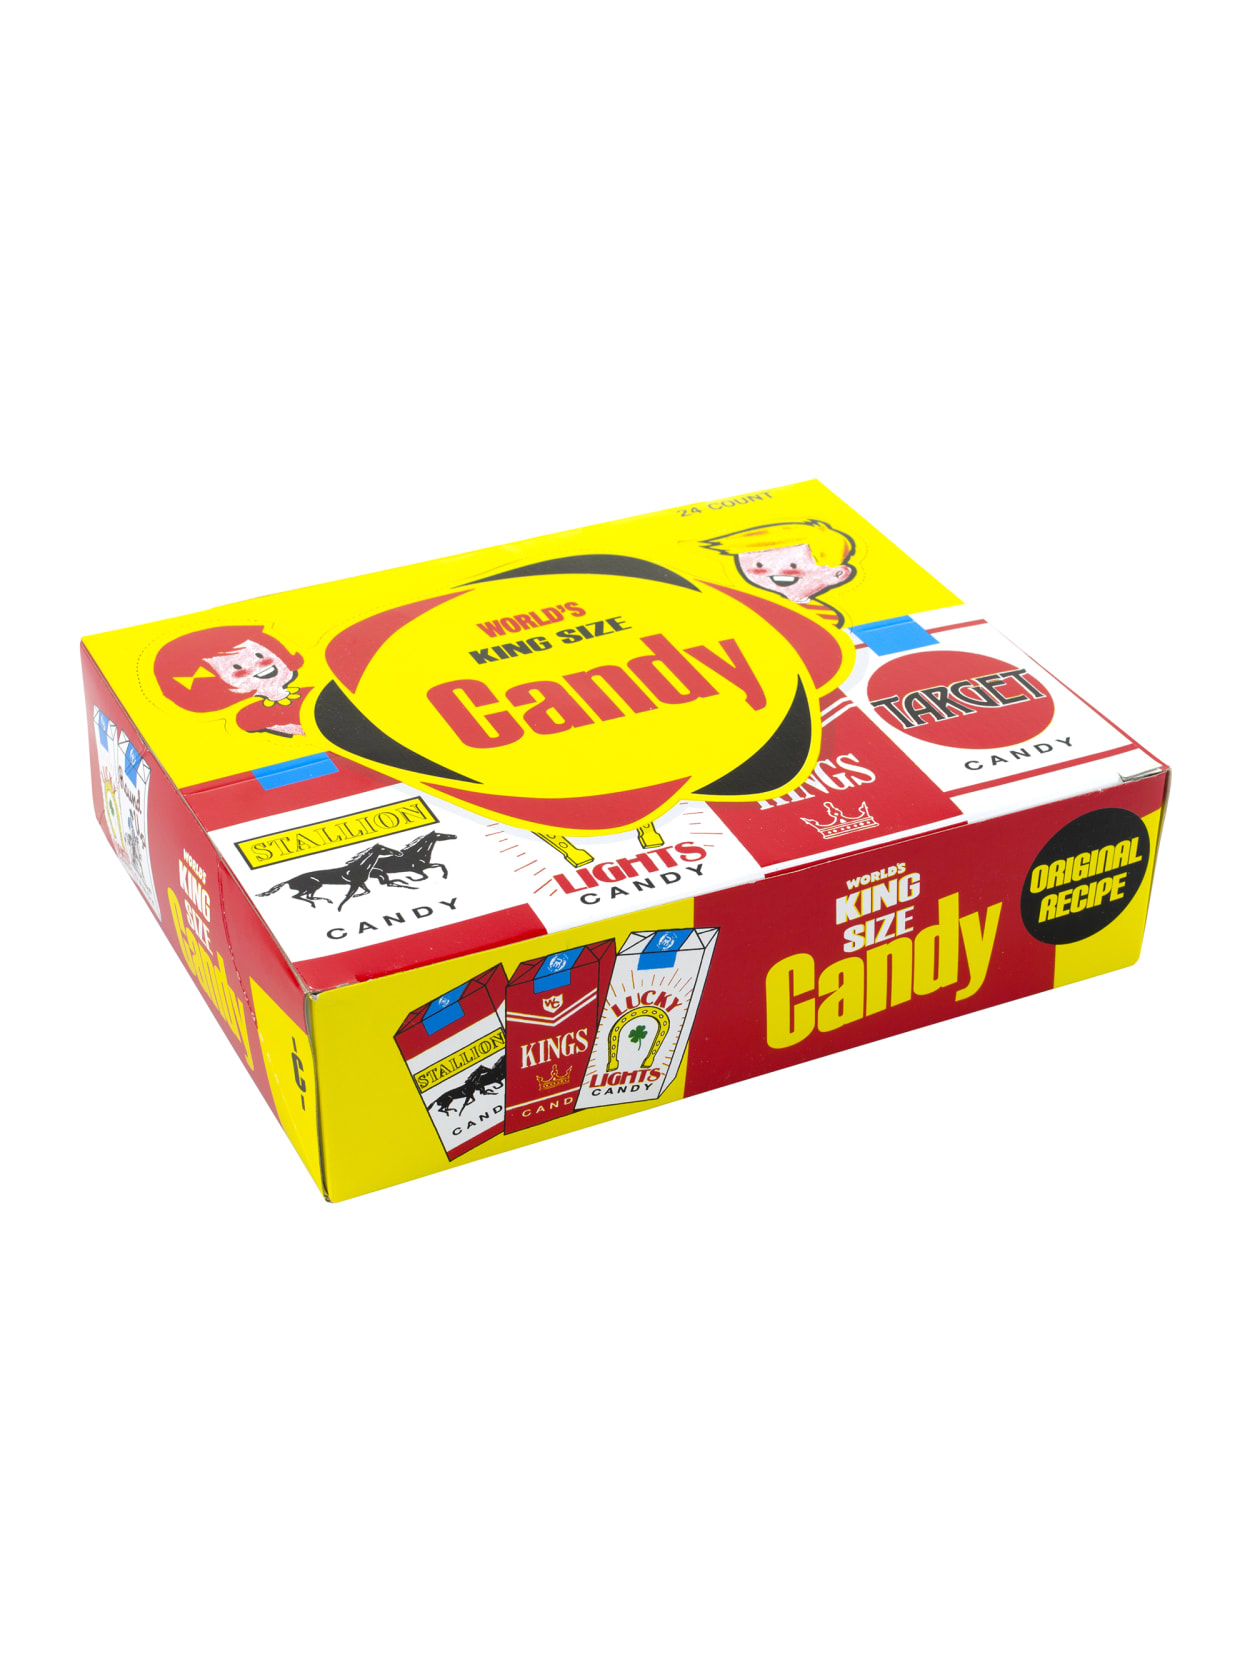 World Confections Candy Cigarettes Pack Of 24 Office Depot